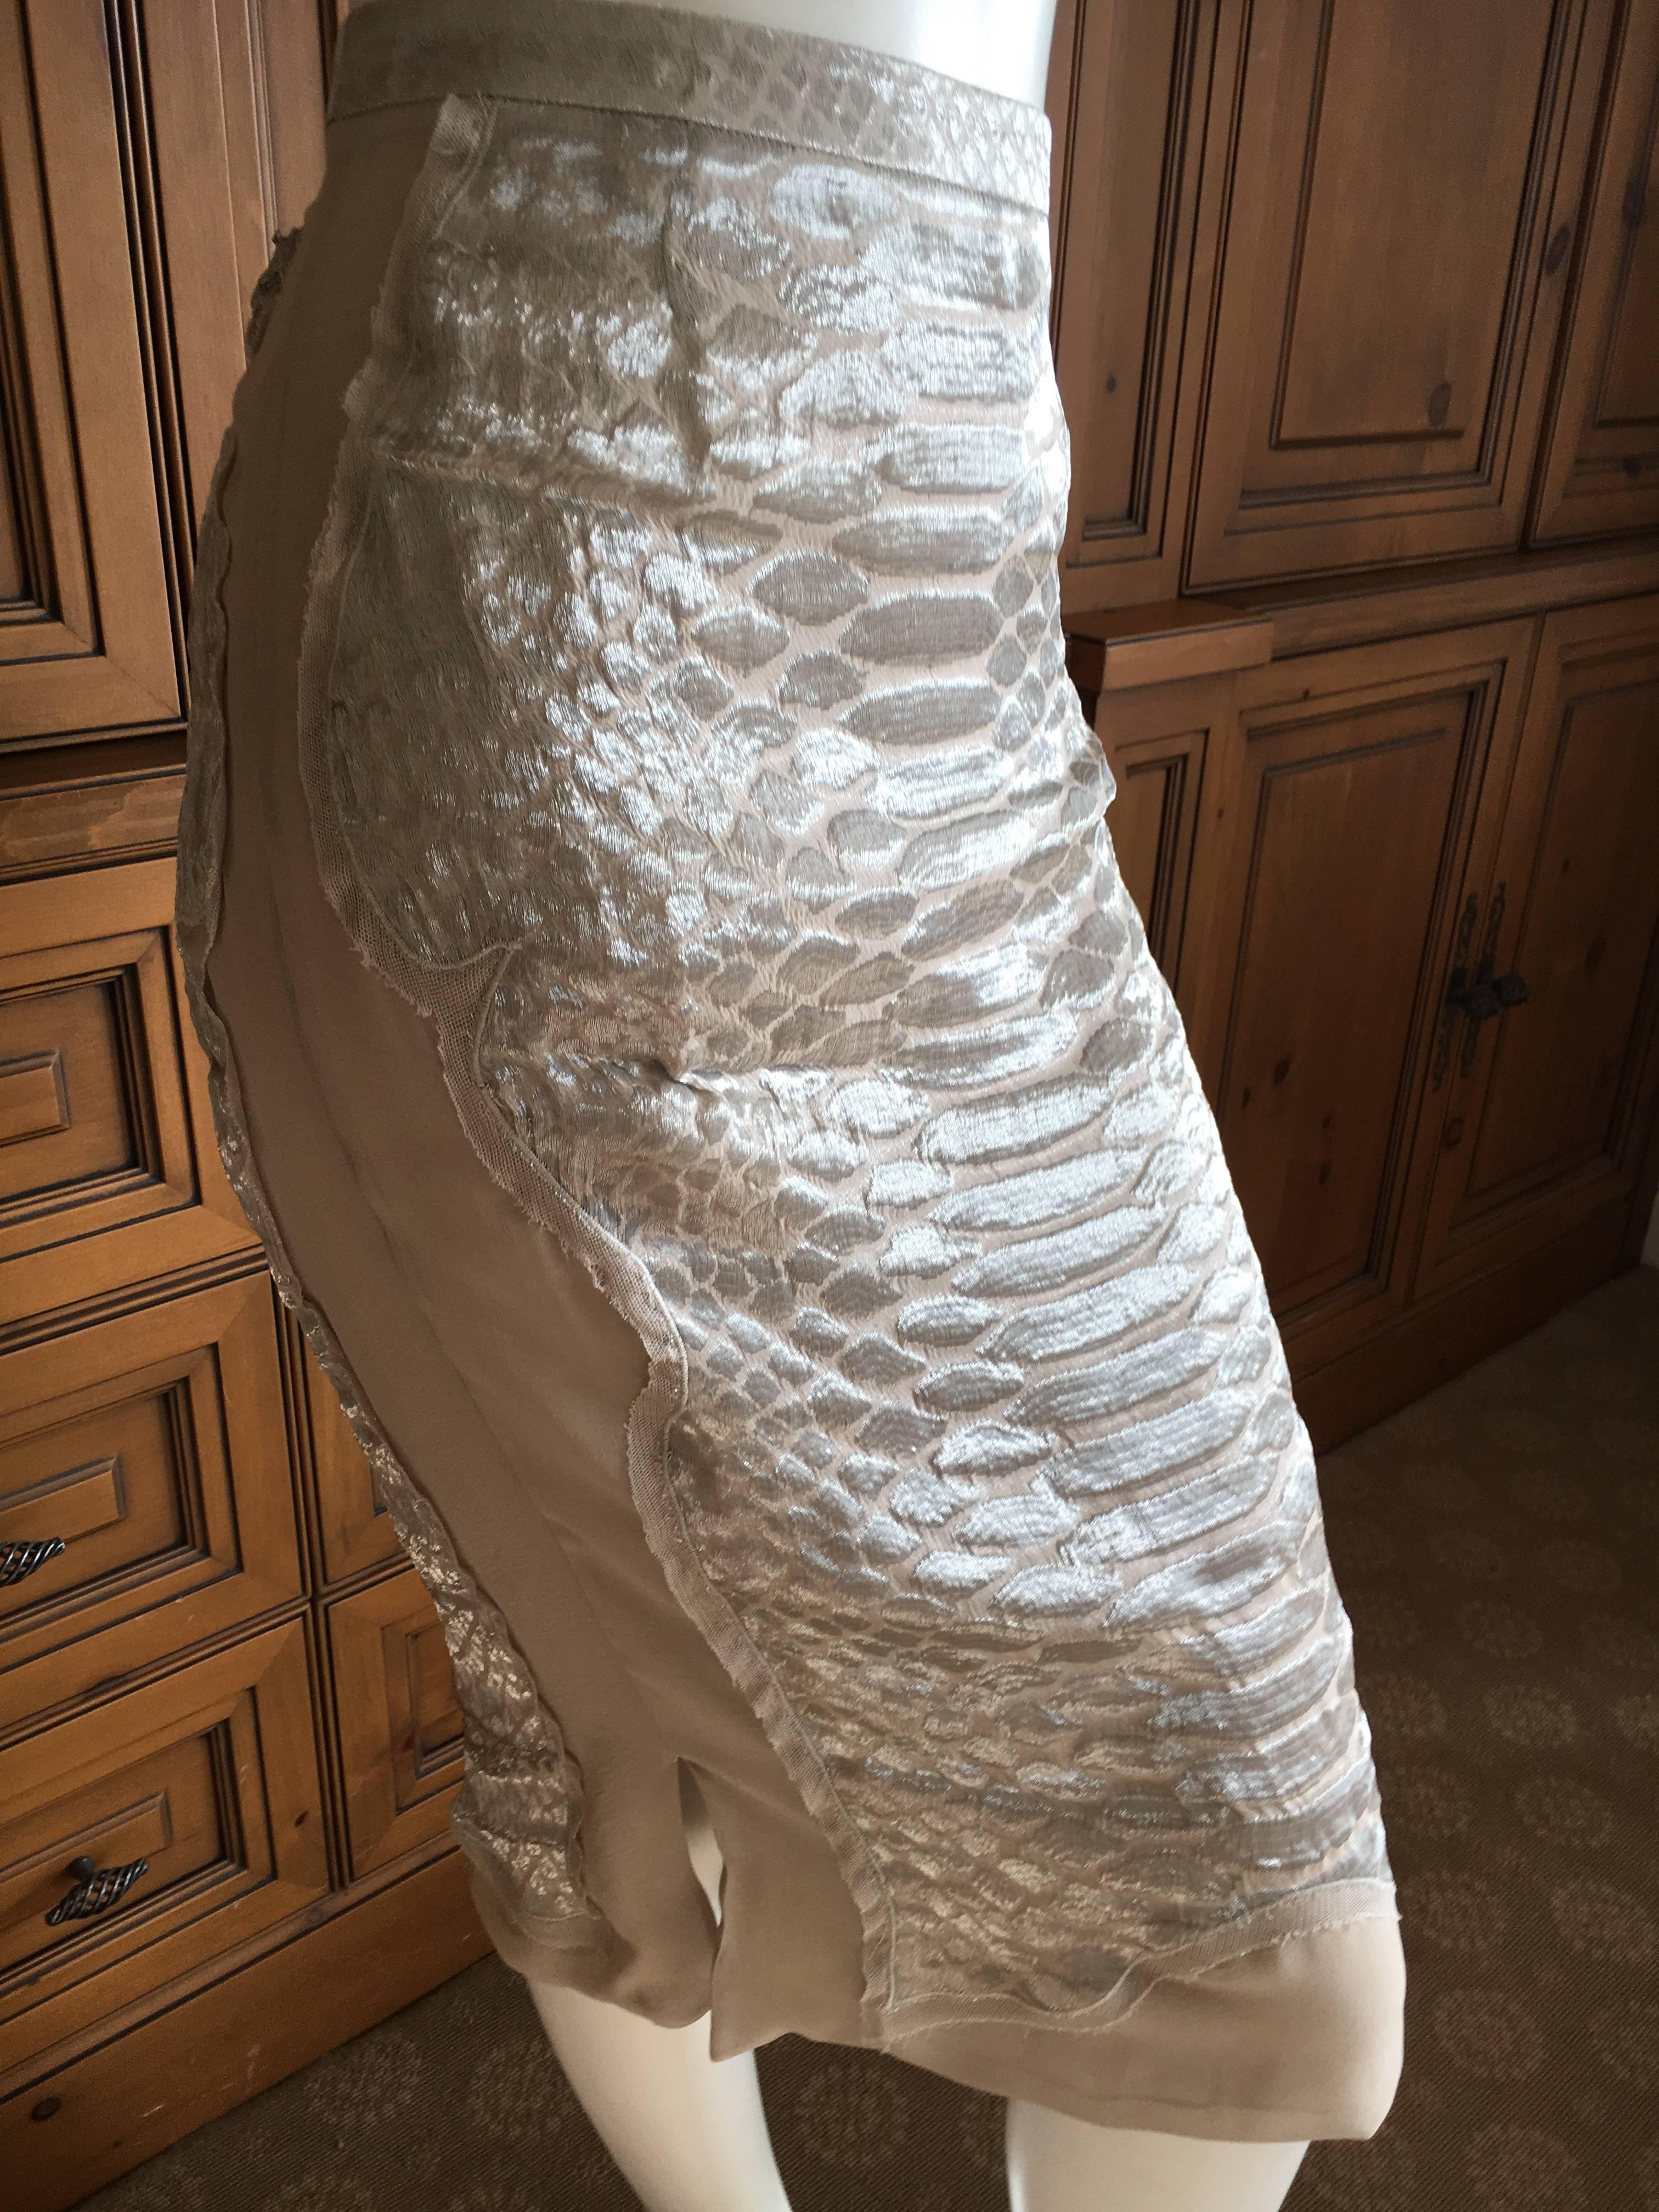 Yves Saint Laurent by Tom Ford 2004 SIlver Thread Silk Skirt In Excellent Condition For Sale In Cloverdale, CA